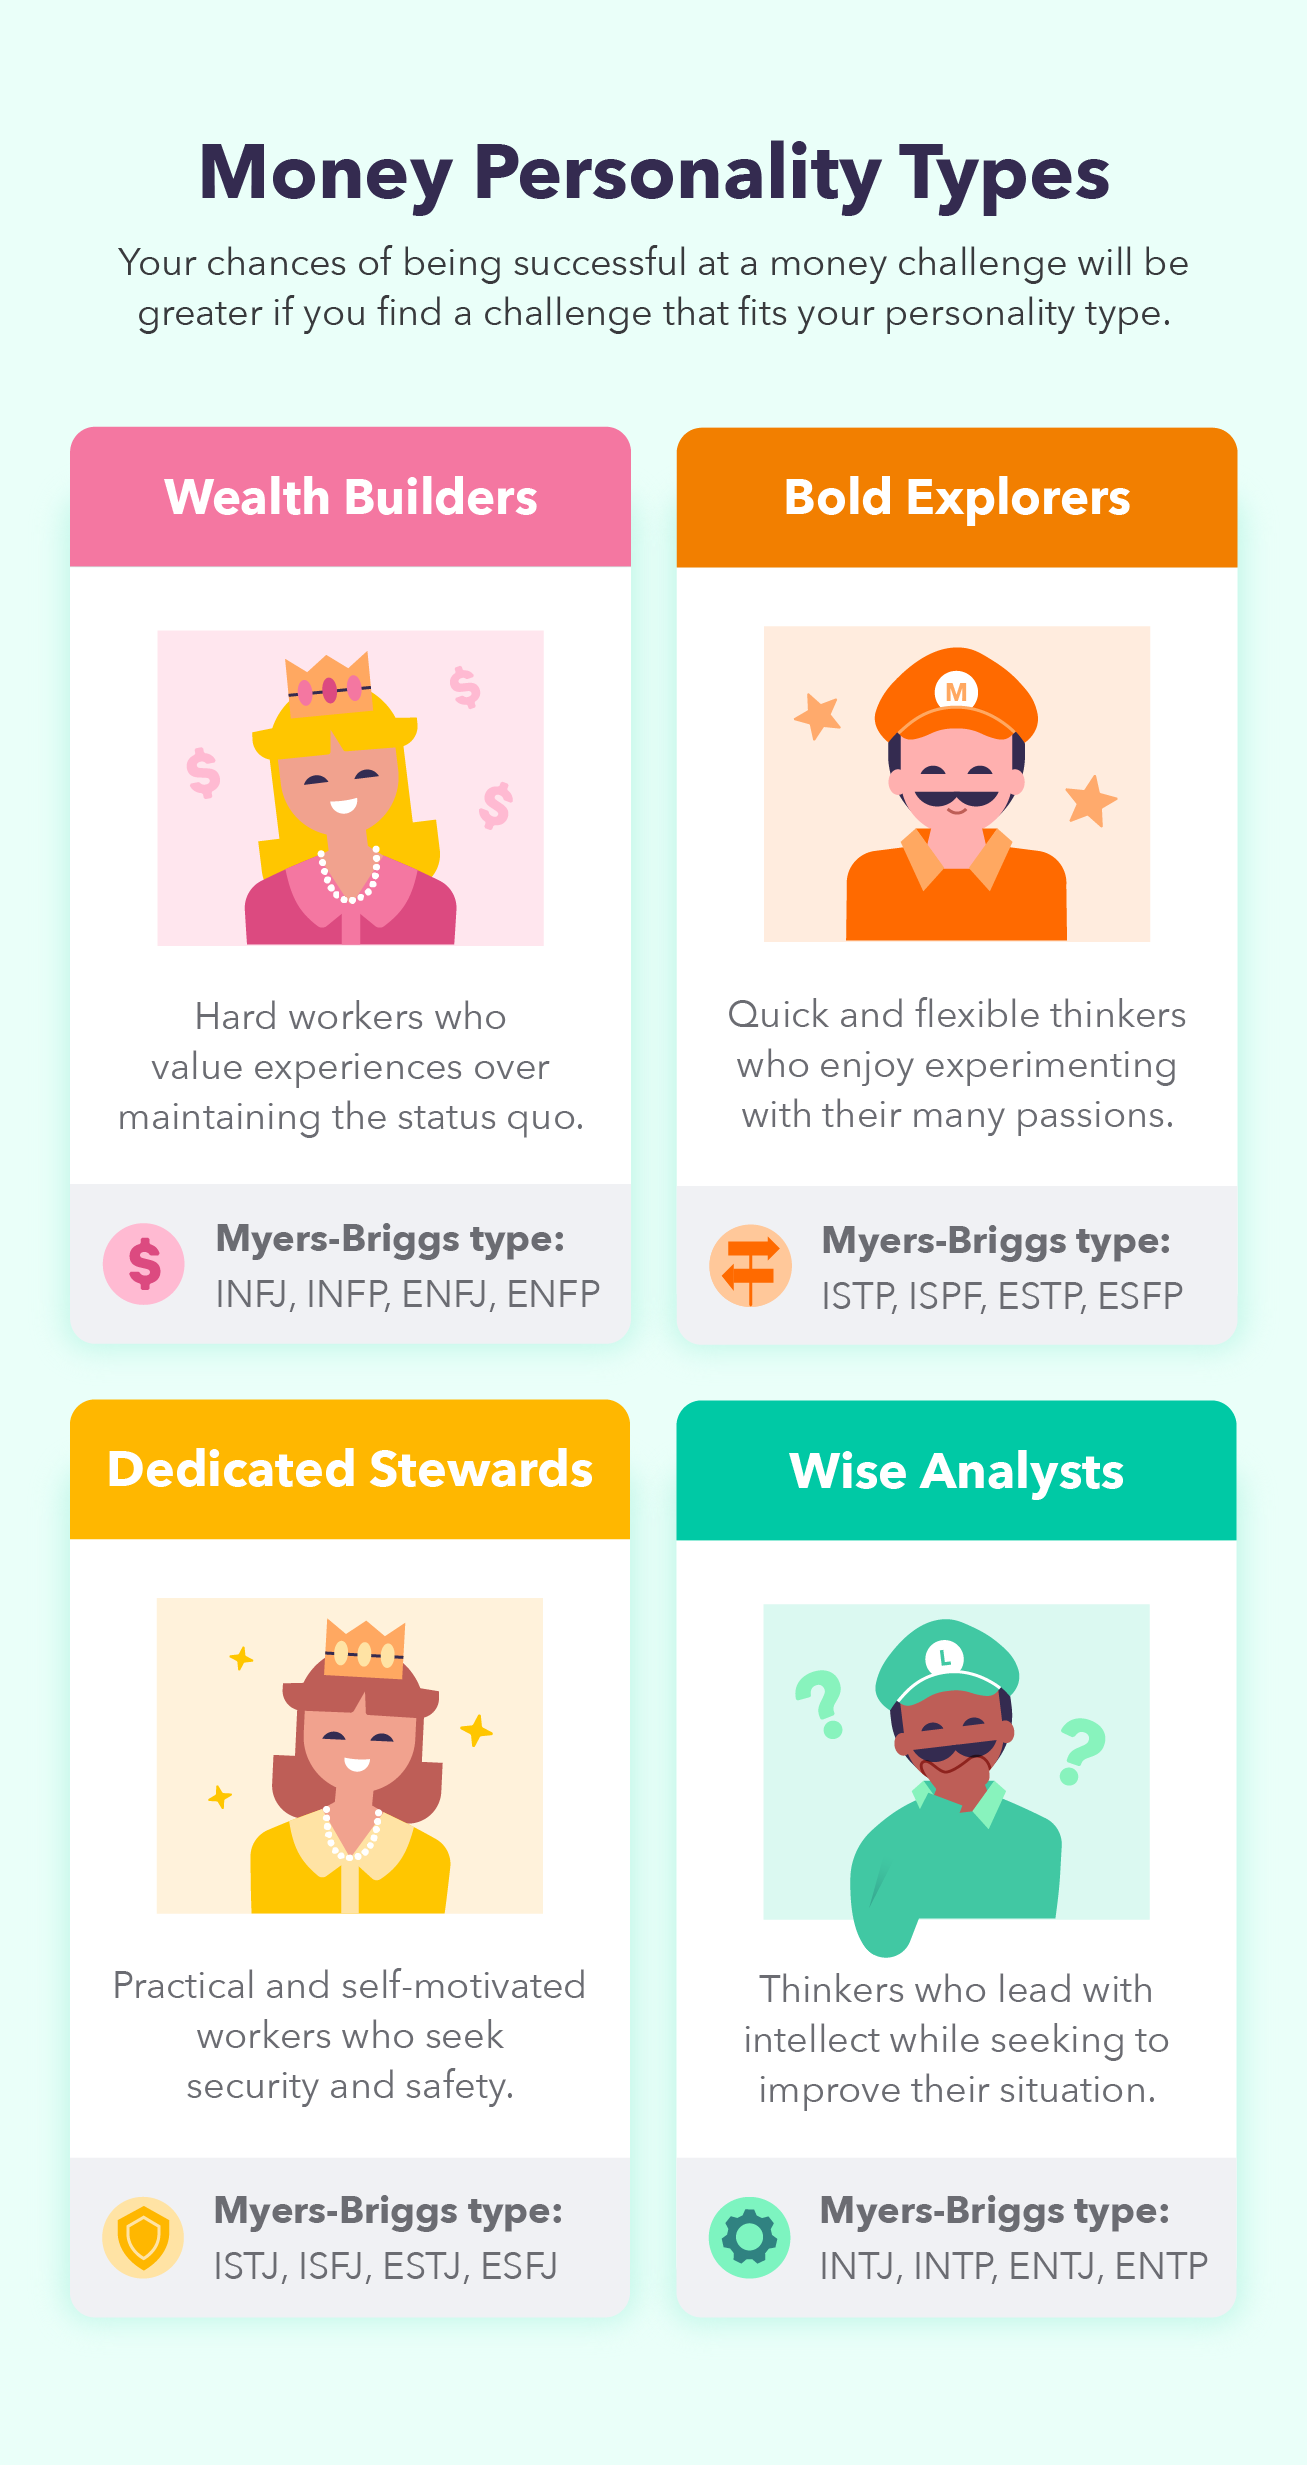 Four illustrations, inspired by Mario Kart characters, underscore different money personality types to help determine what money-saving challenge is most fitting for your personality.